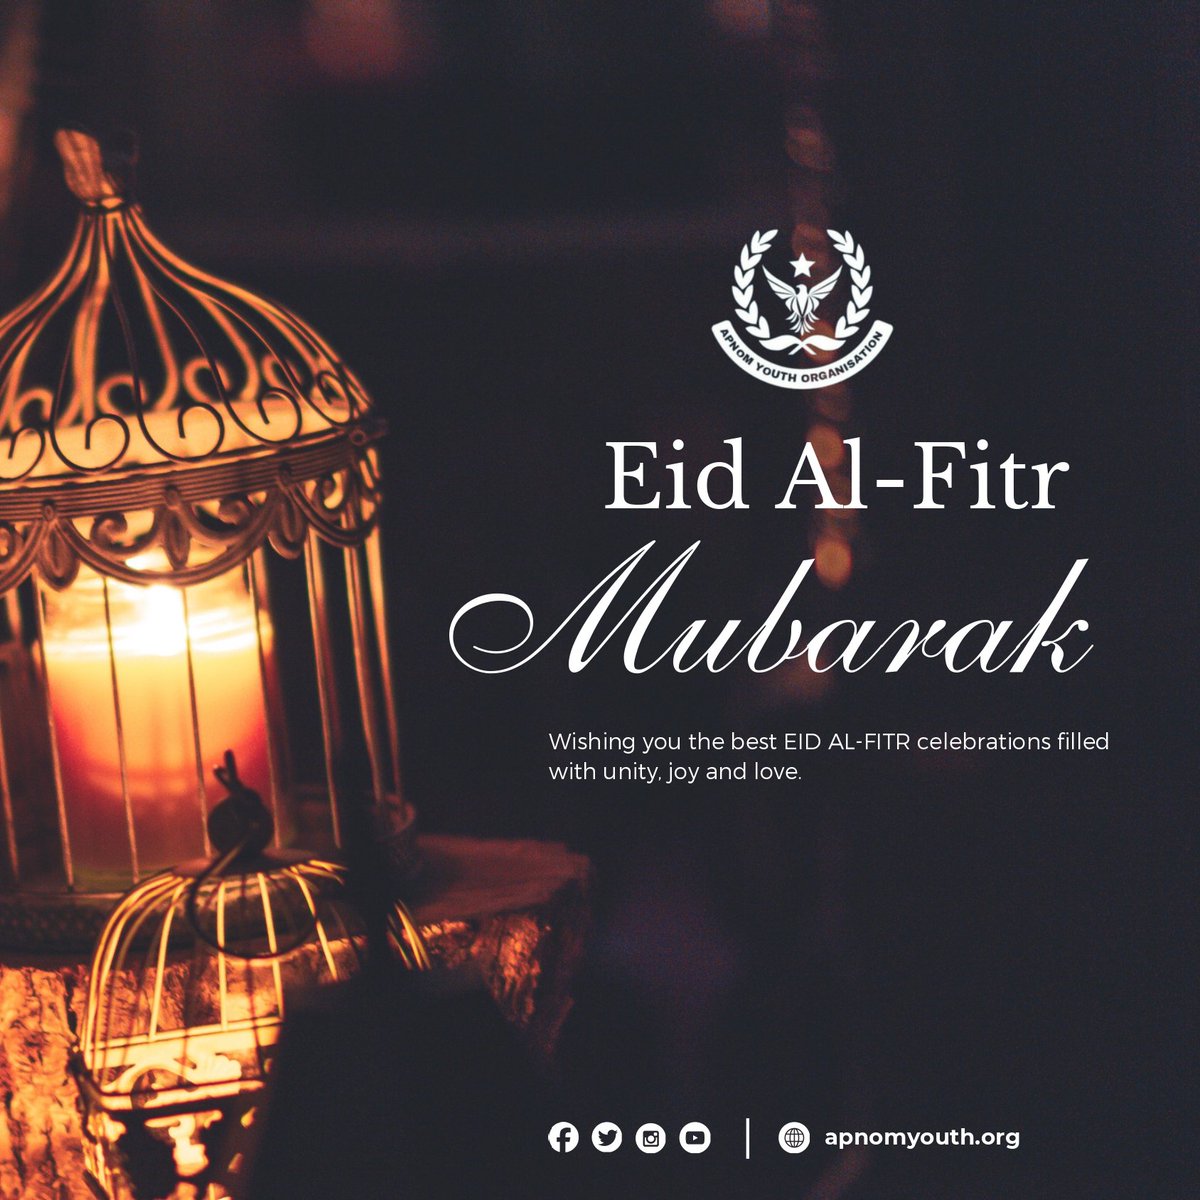 Eid Mubarak! Wishing you joy, blessings, and prosperity on this Eid Al-Fitr. May your celebrations be filled with love and unity. From all of us at Apnom Youth Organisation.